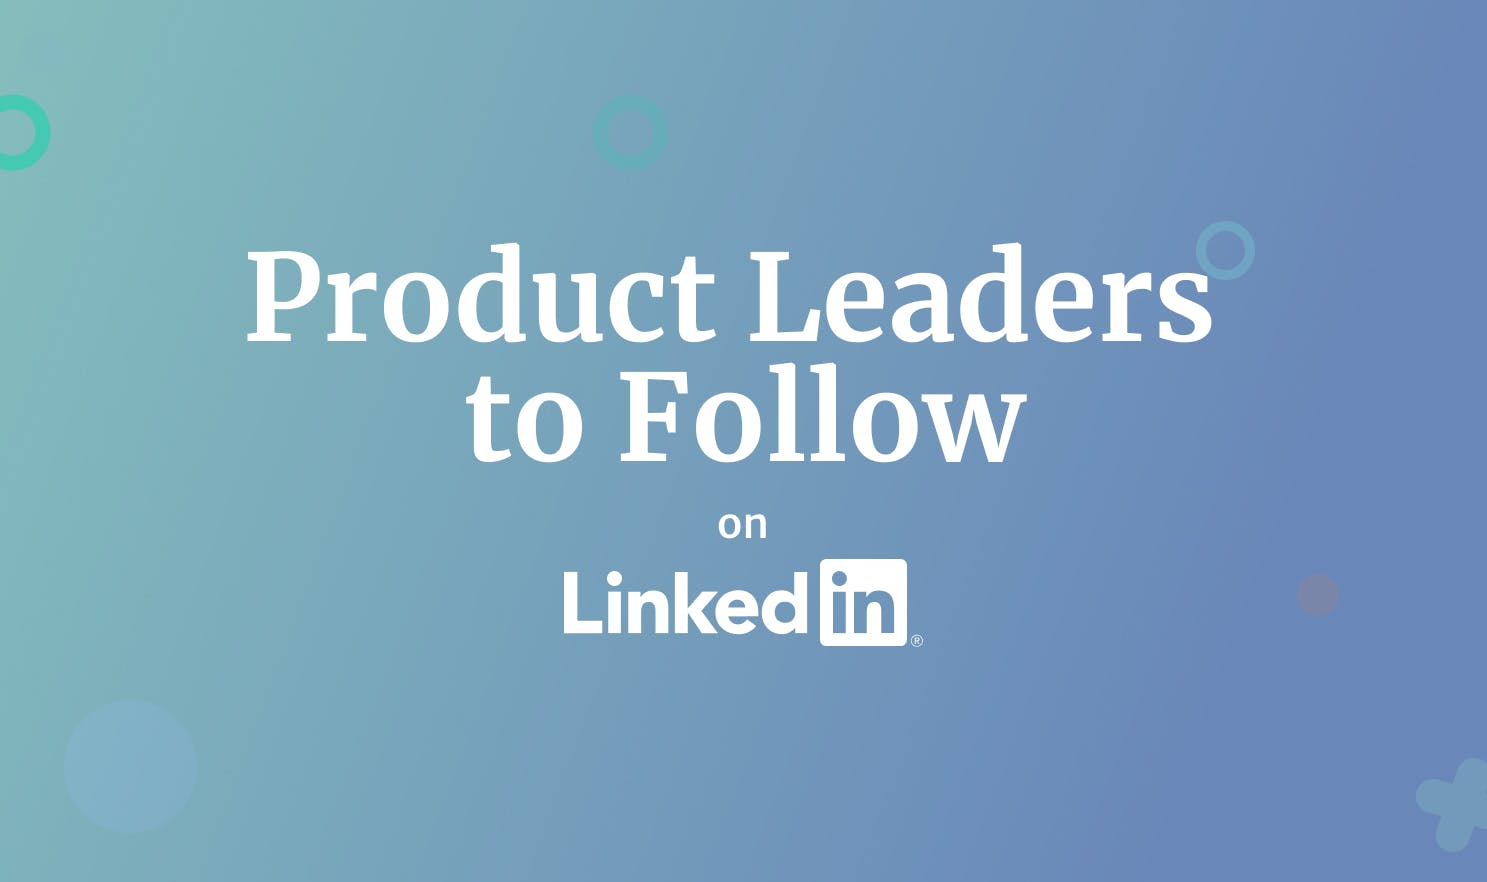 Product Leaders to Follow on LinkedIn